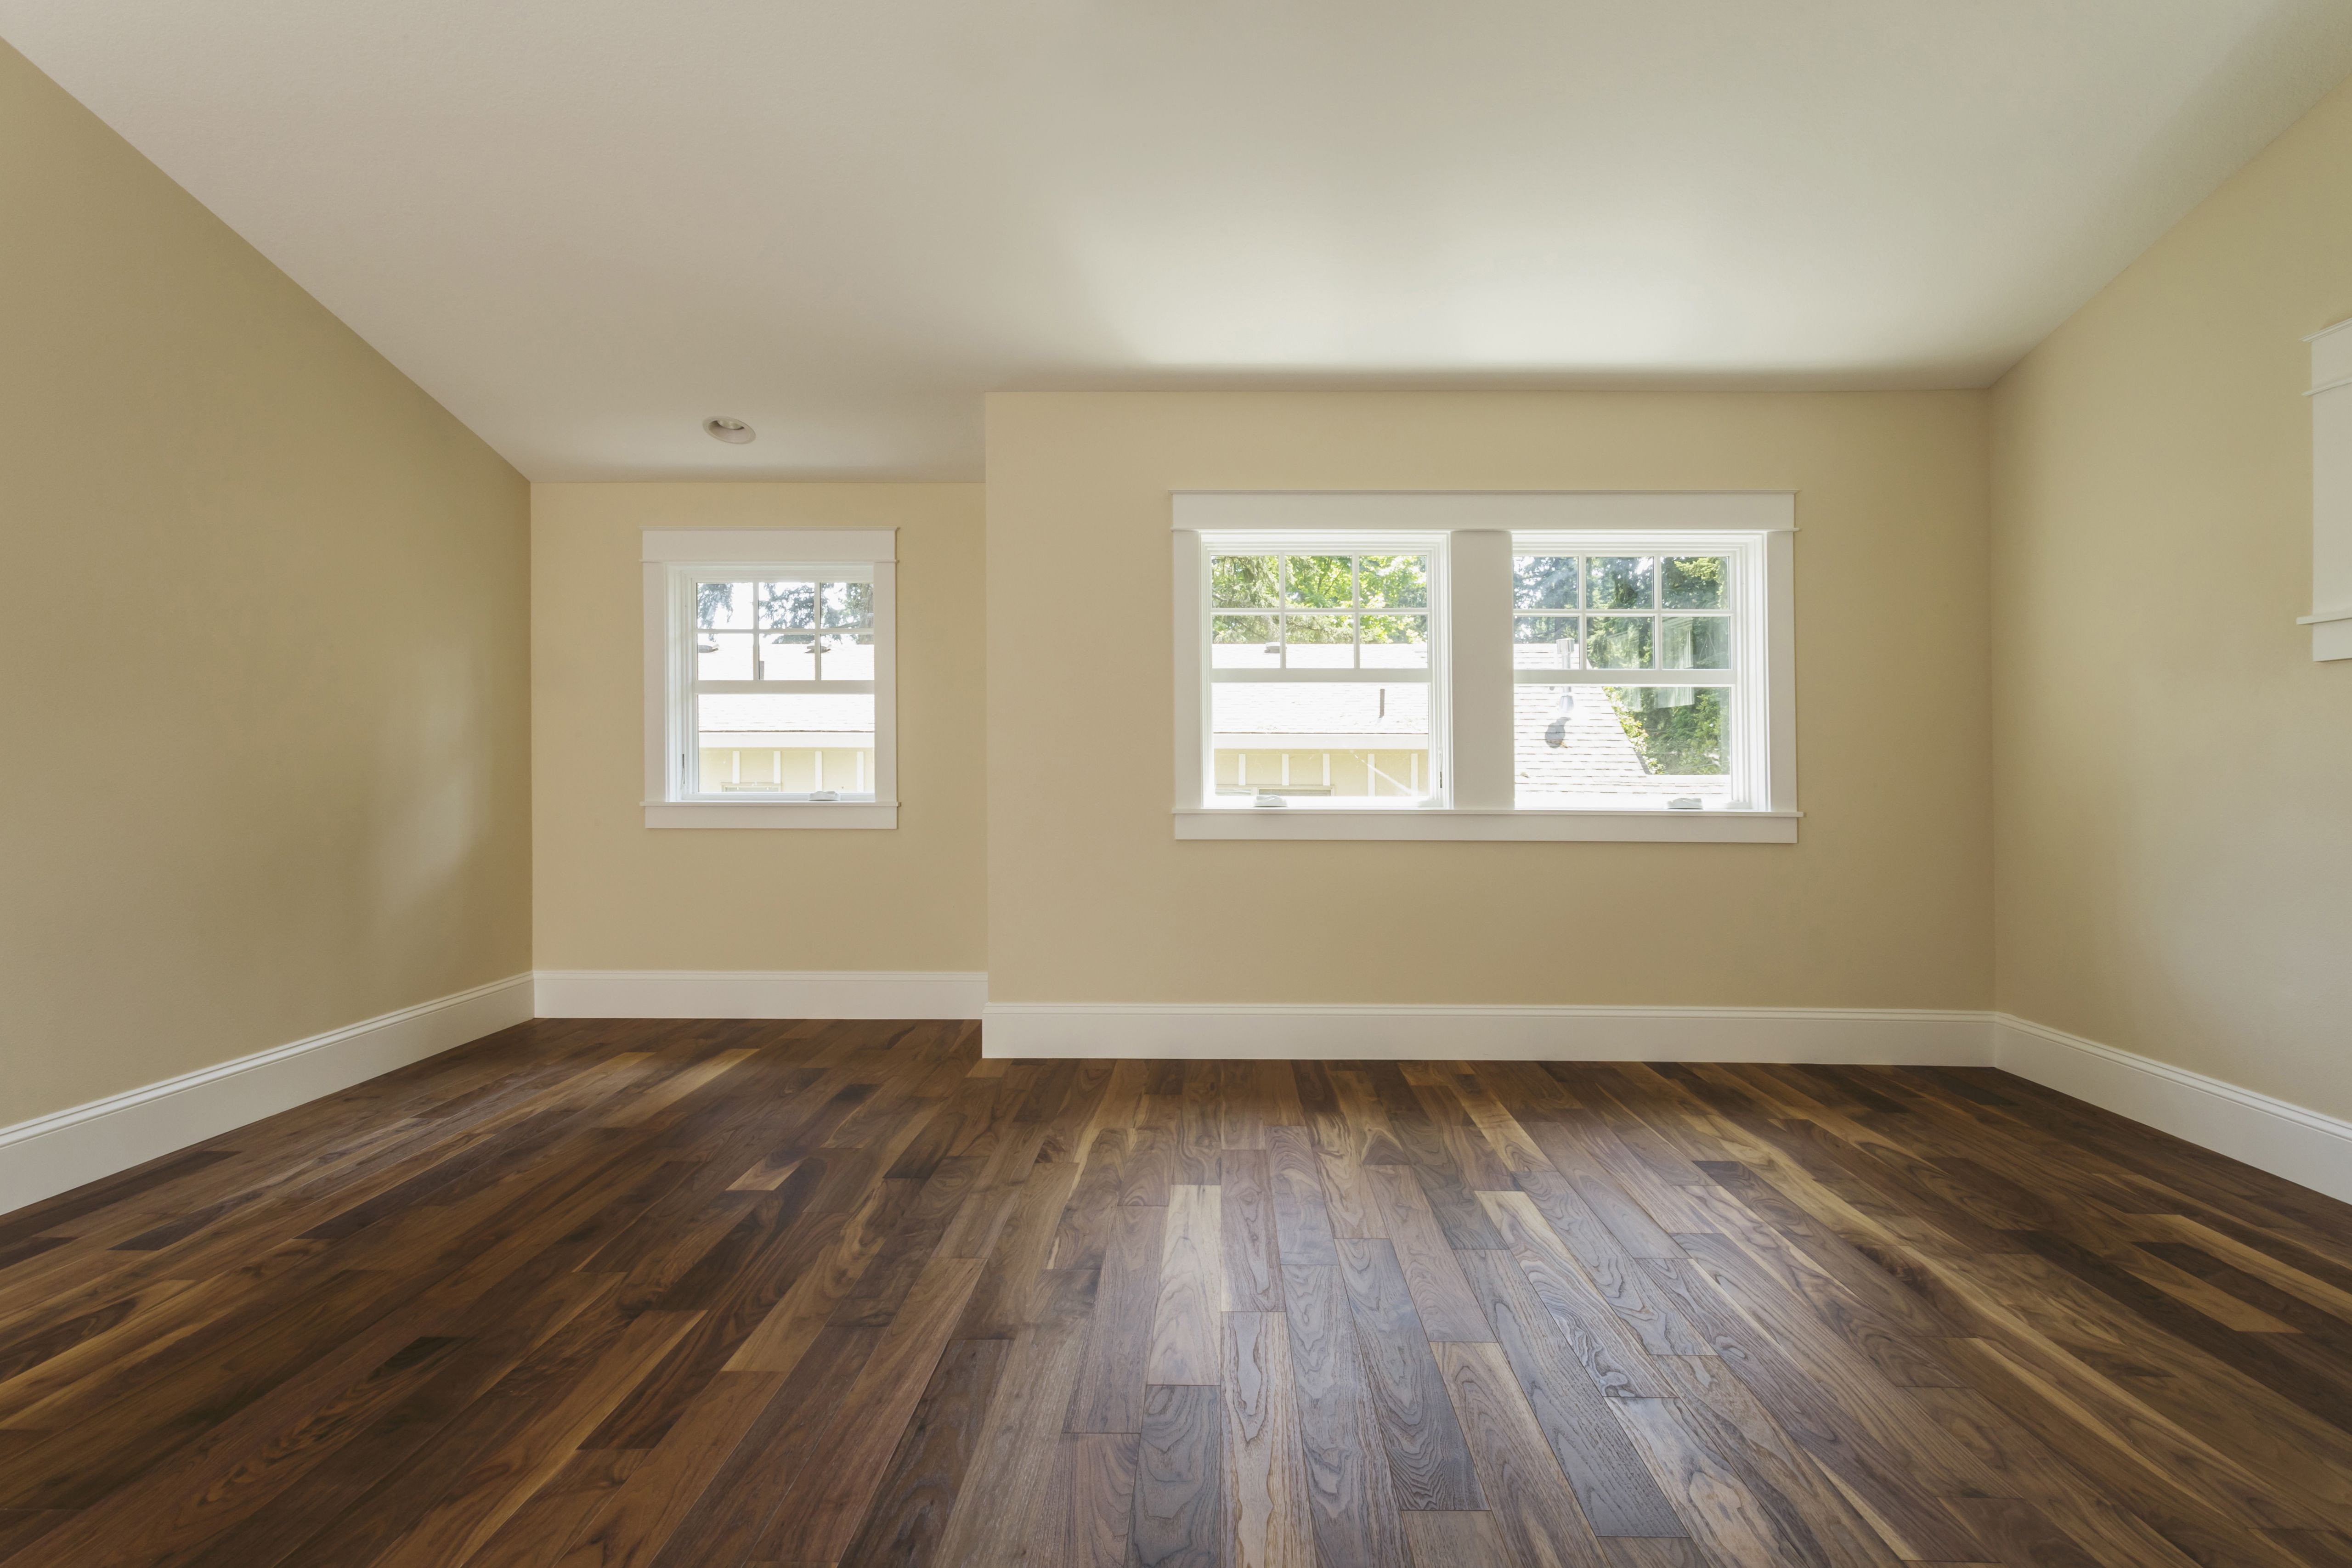 15 Stunning What Direction Should Hardwood Floor Run 2024 free download what direction should hardwood floor run of its easy and fast to install plank vinyl flooring throughout wooden floor in empty bedroom 482143001 588bd5f45f9b5874eebd56e9